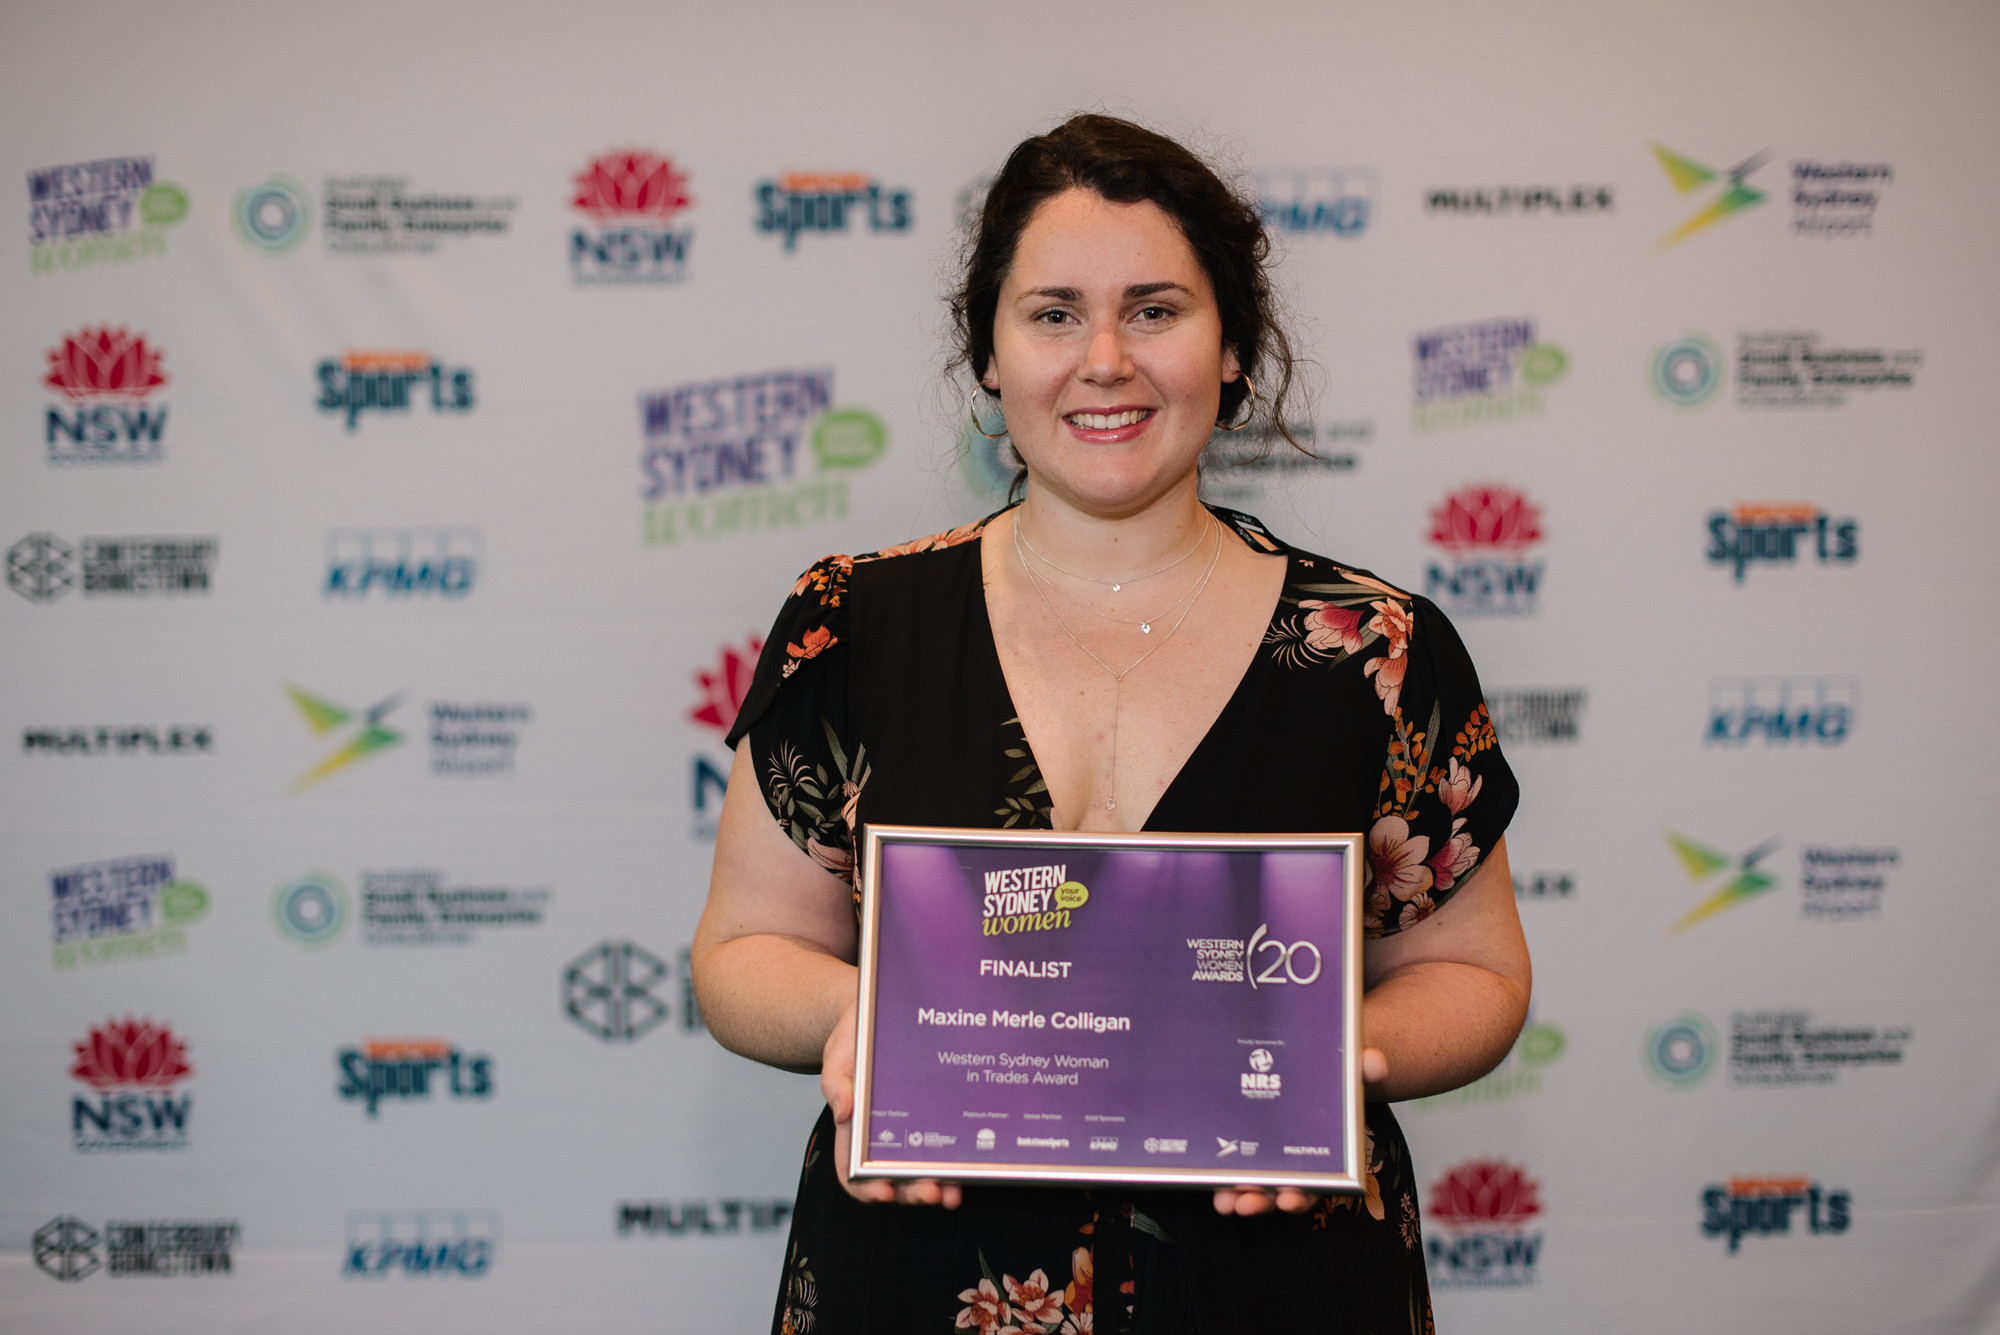 Maxine Colligan Named Western Sydney Woman Of The Year